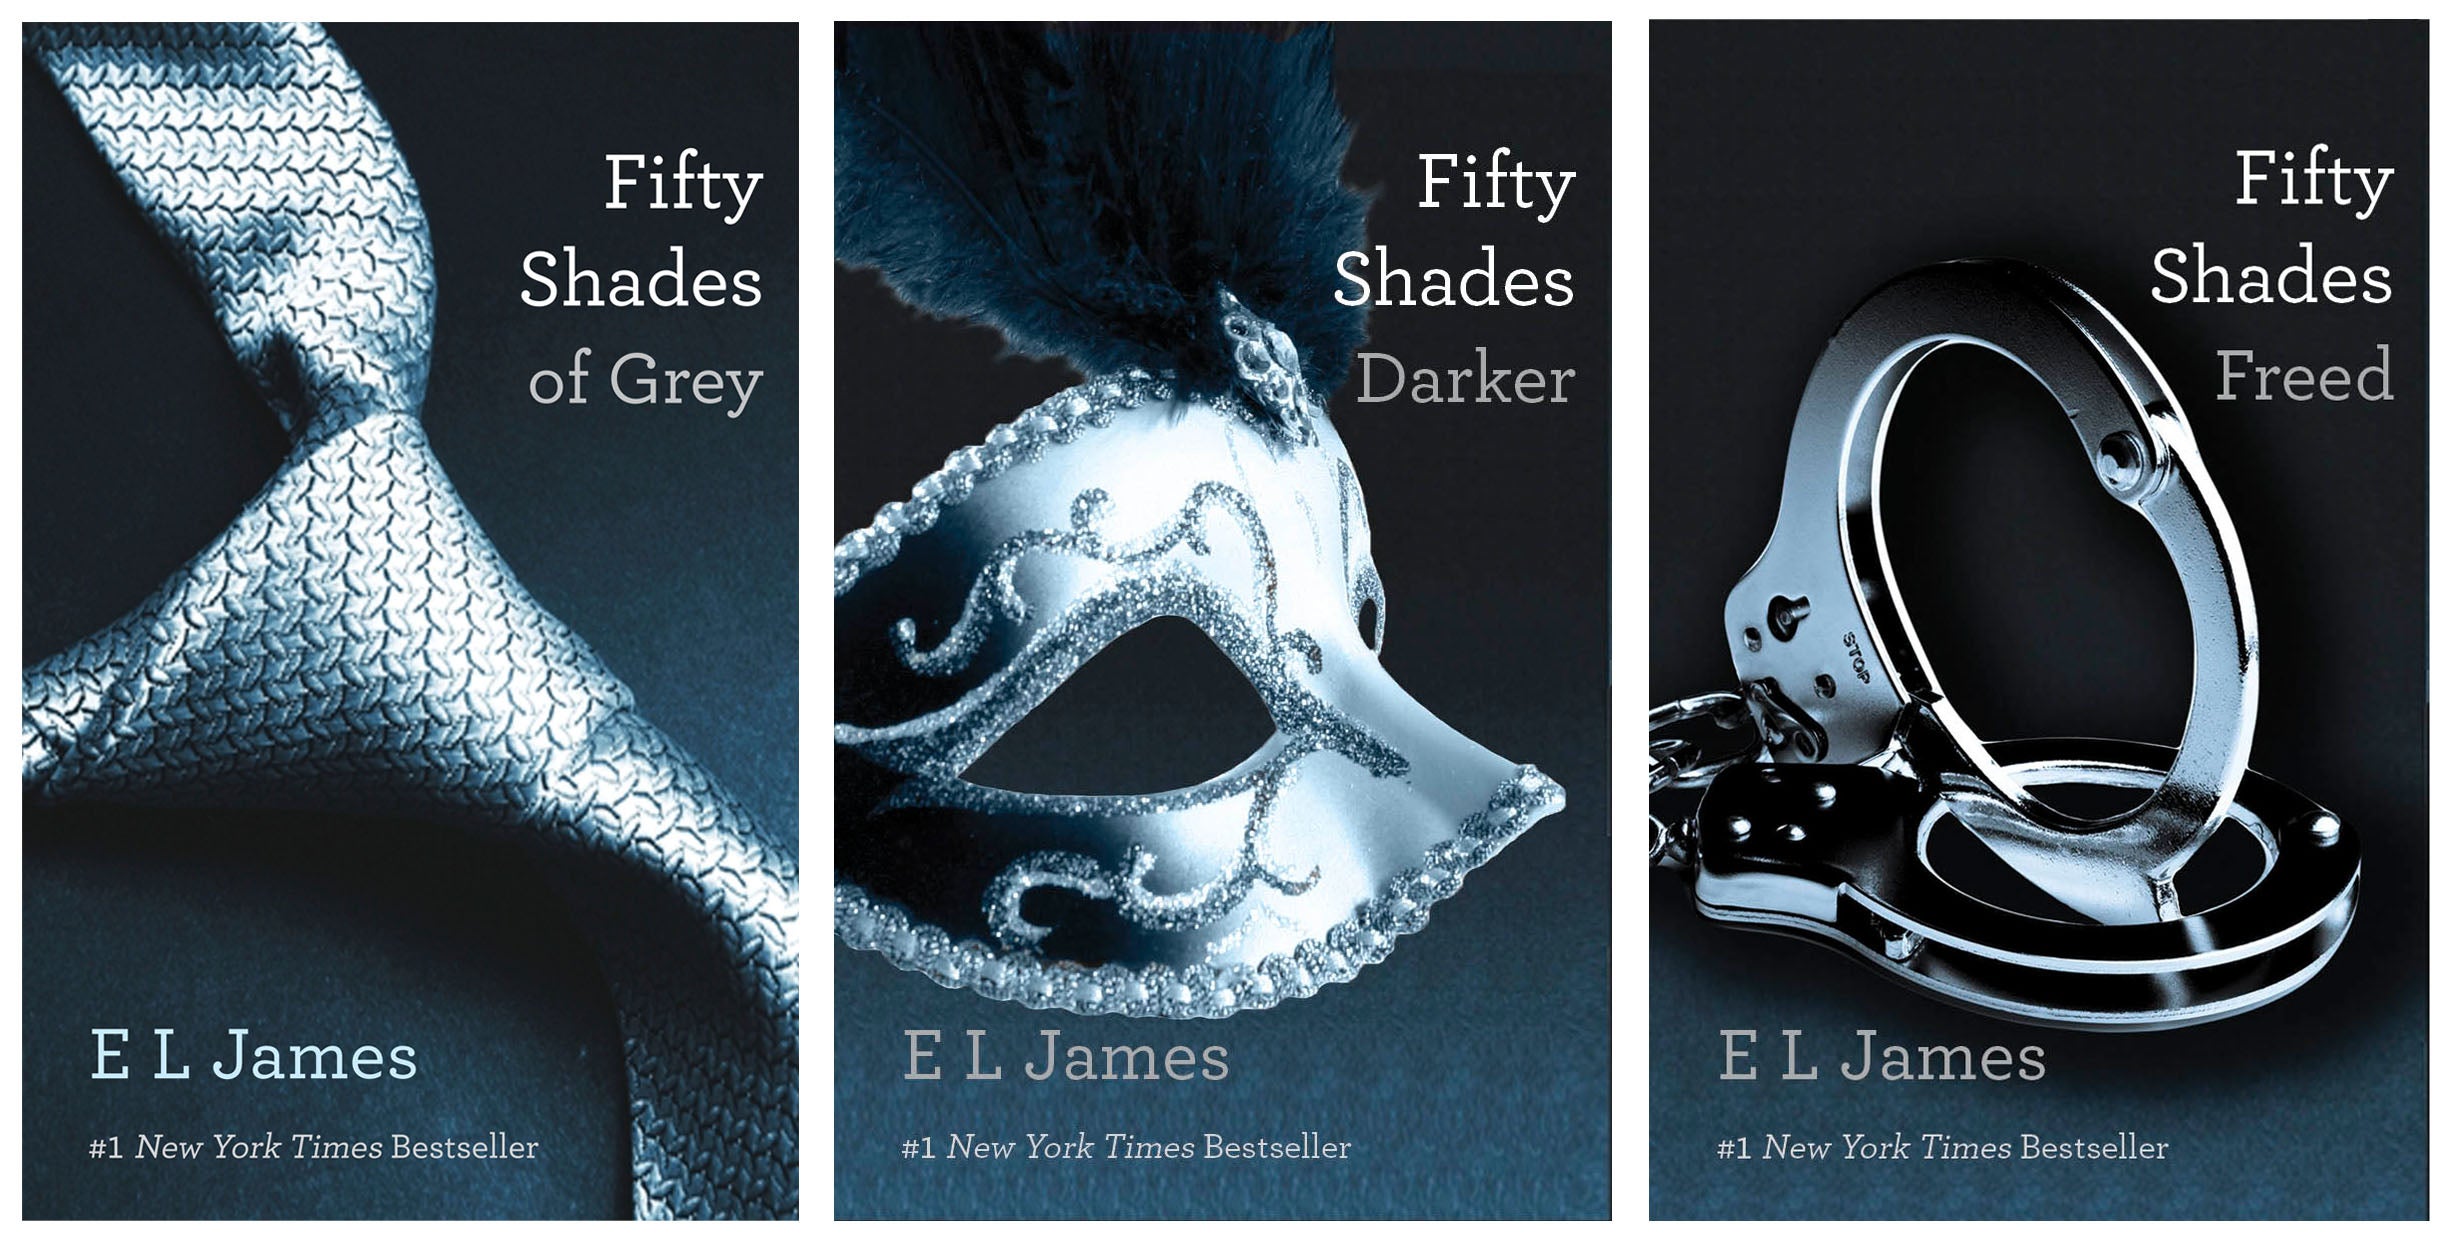 analysis of fifty shades of grey